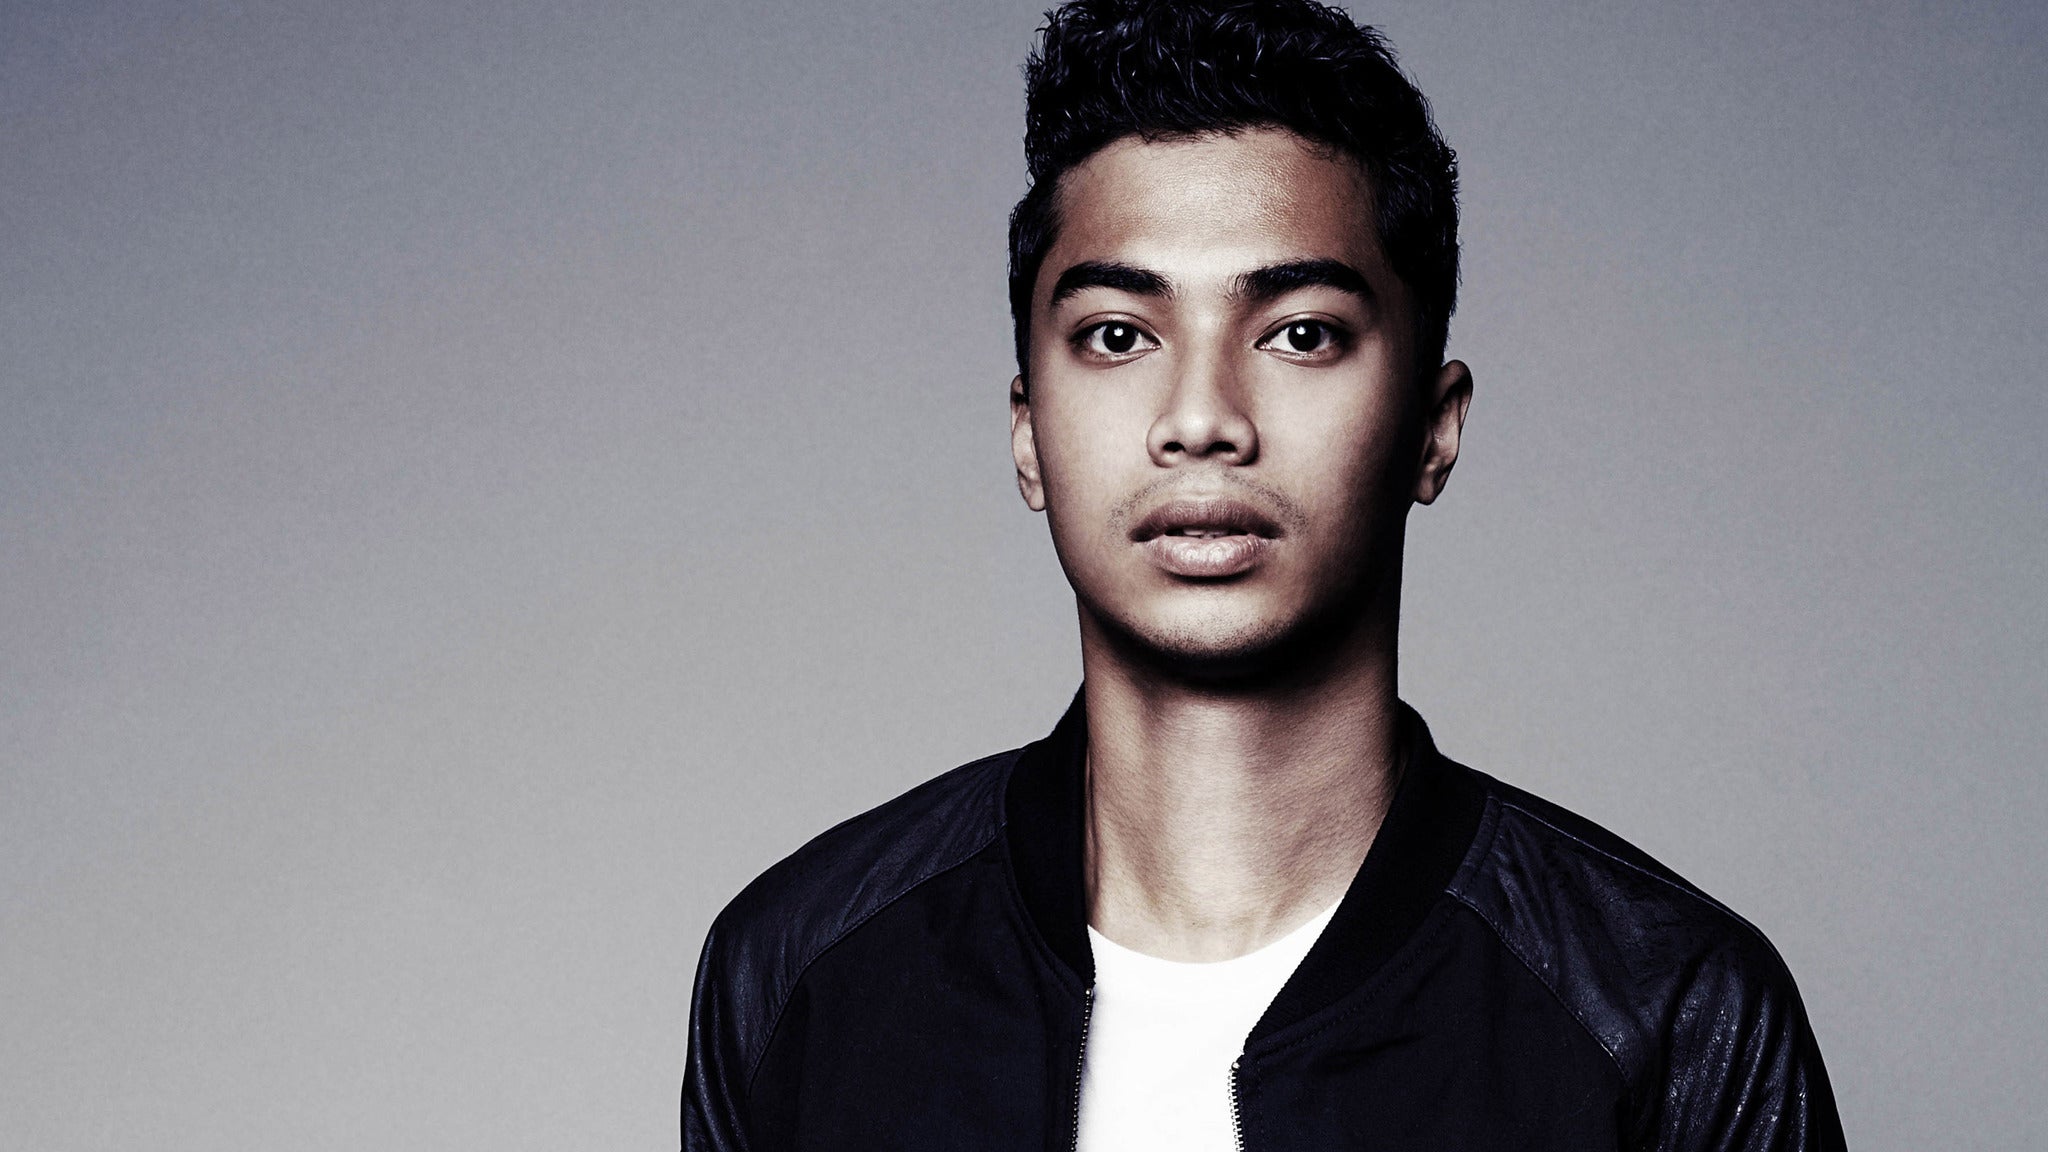 Michael Brun presents BAYO in New York promo photo for Live Nation presale offer code